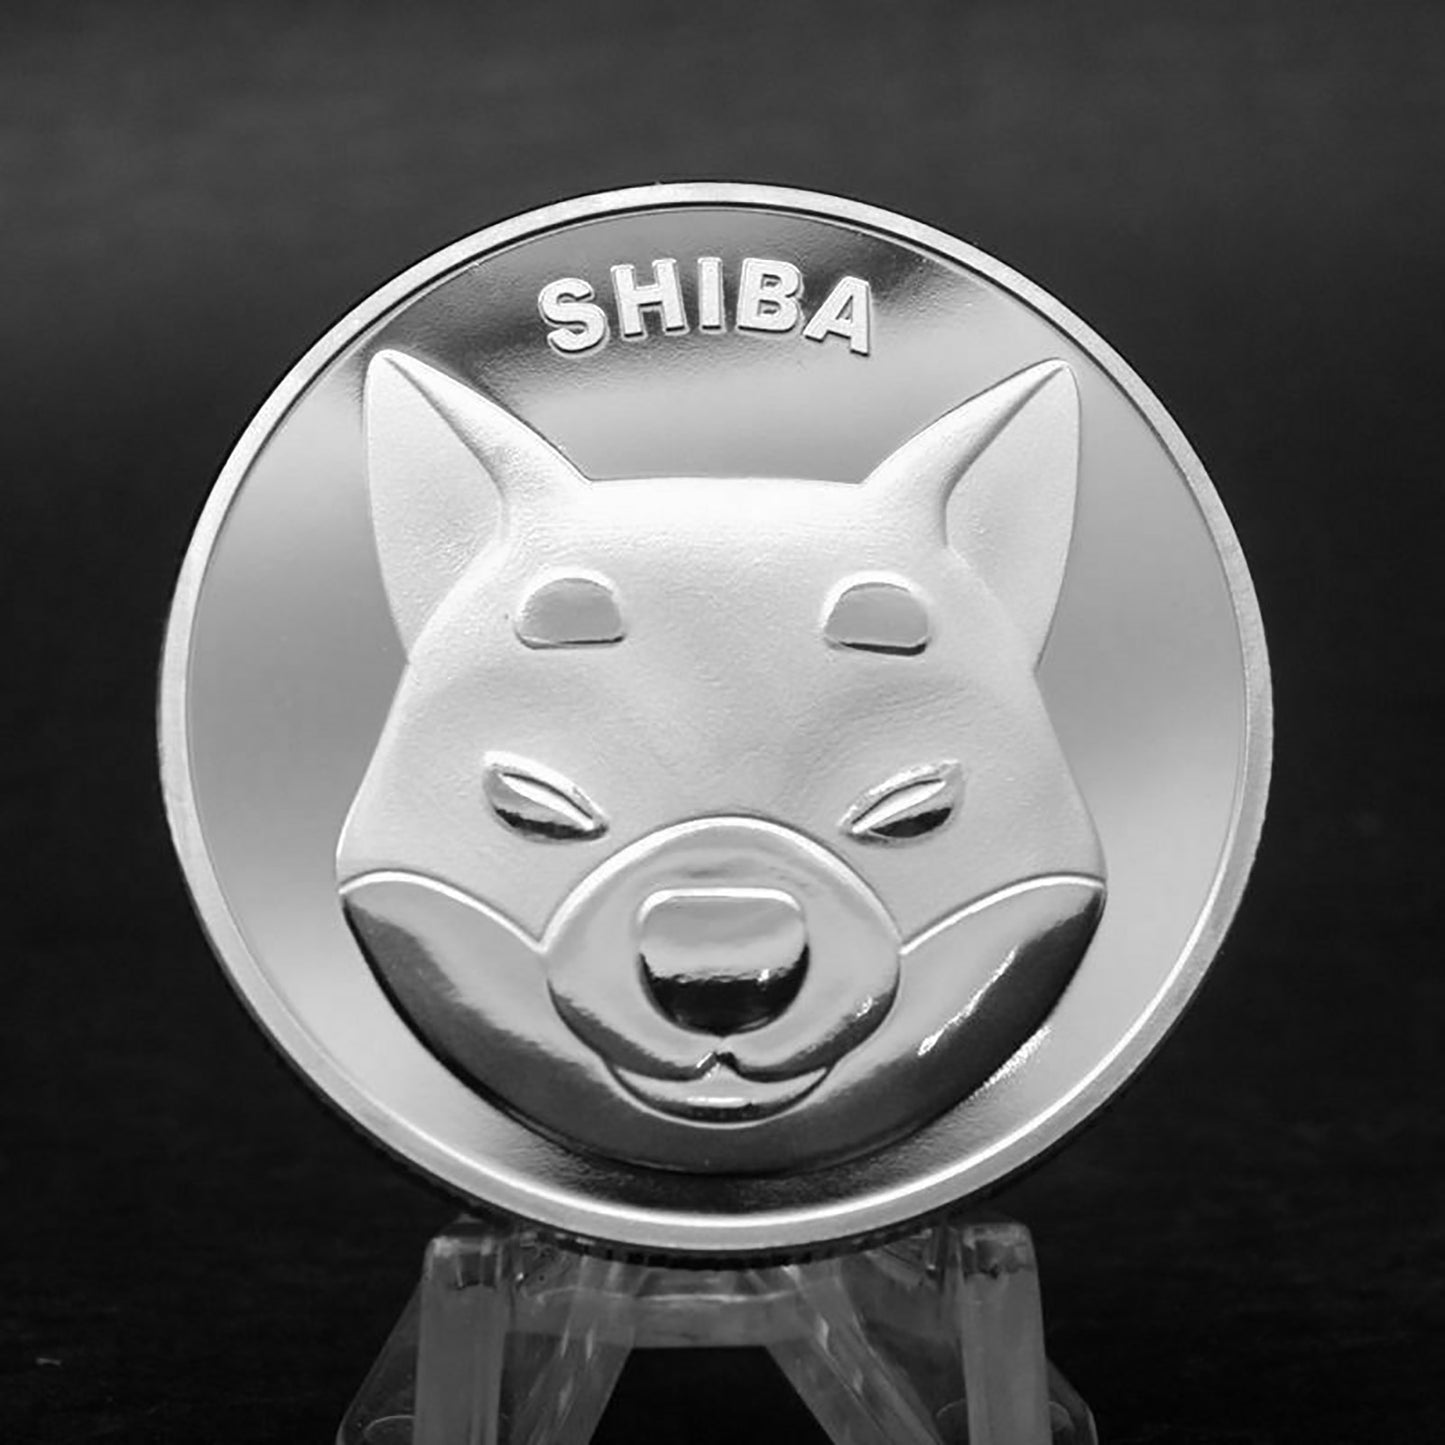 Shiba Inu Physical Gold Plated Coin (Metal)